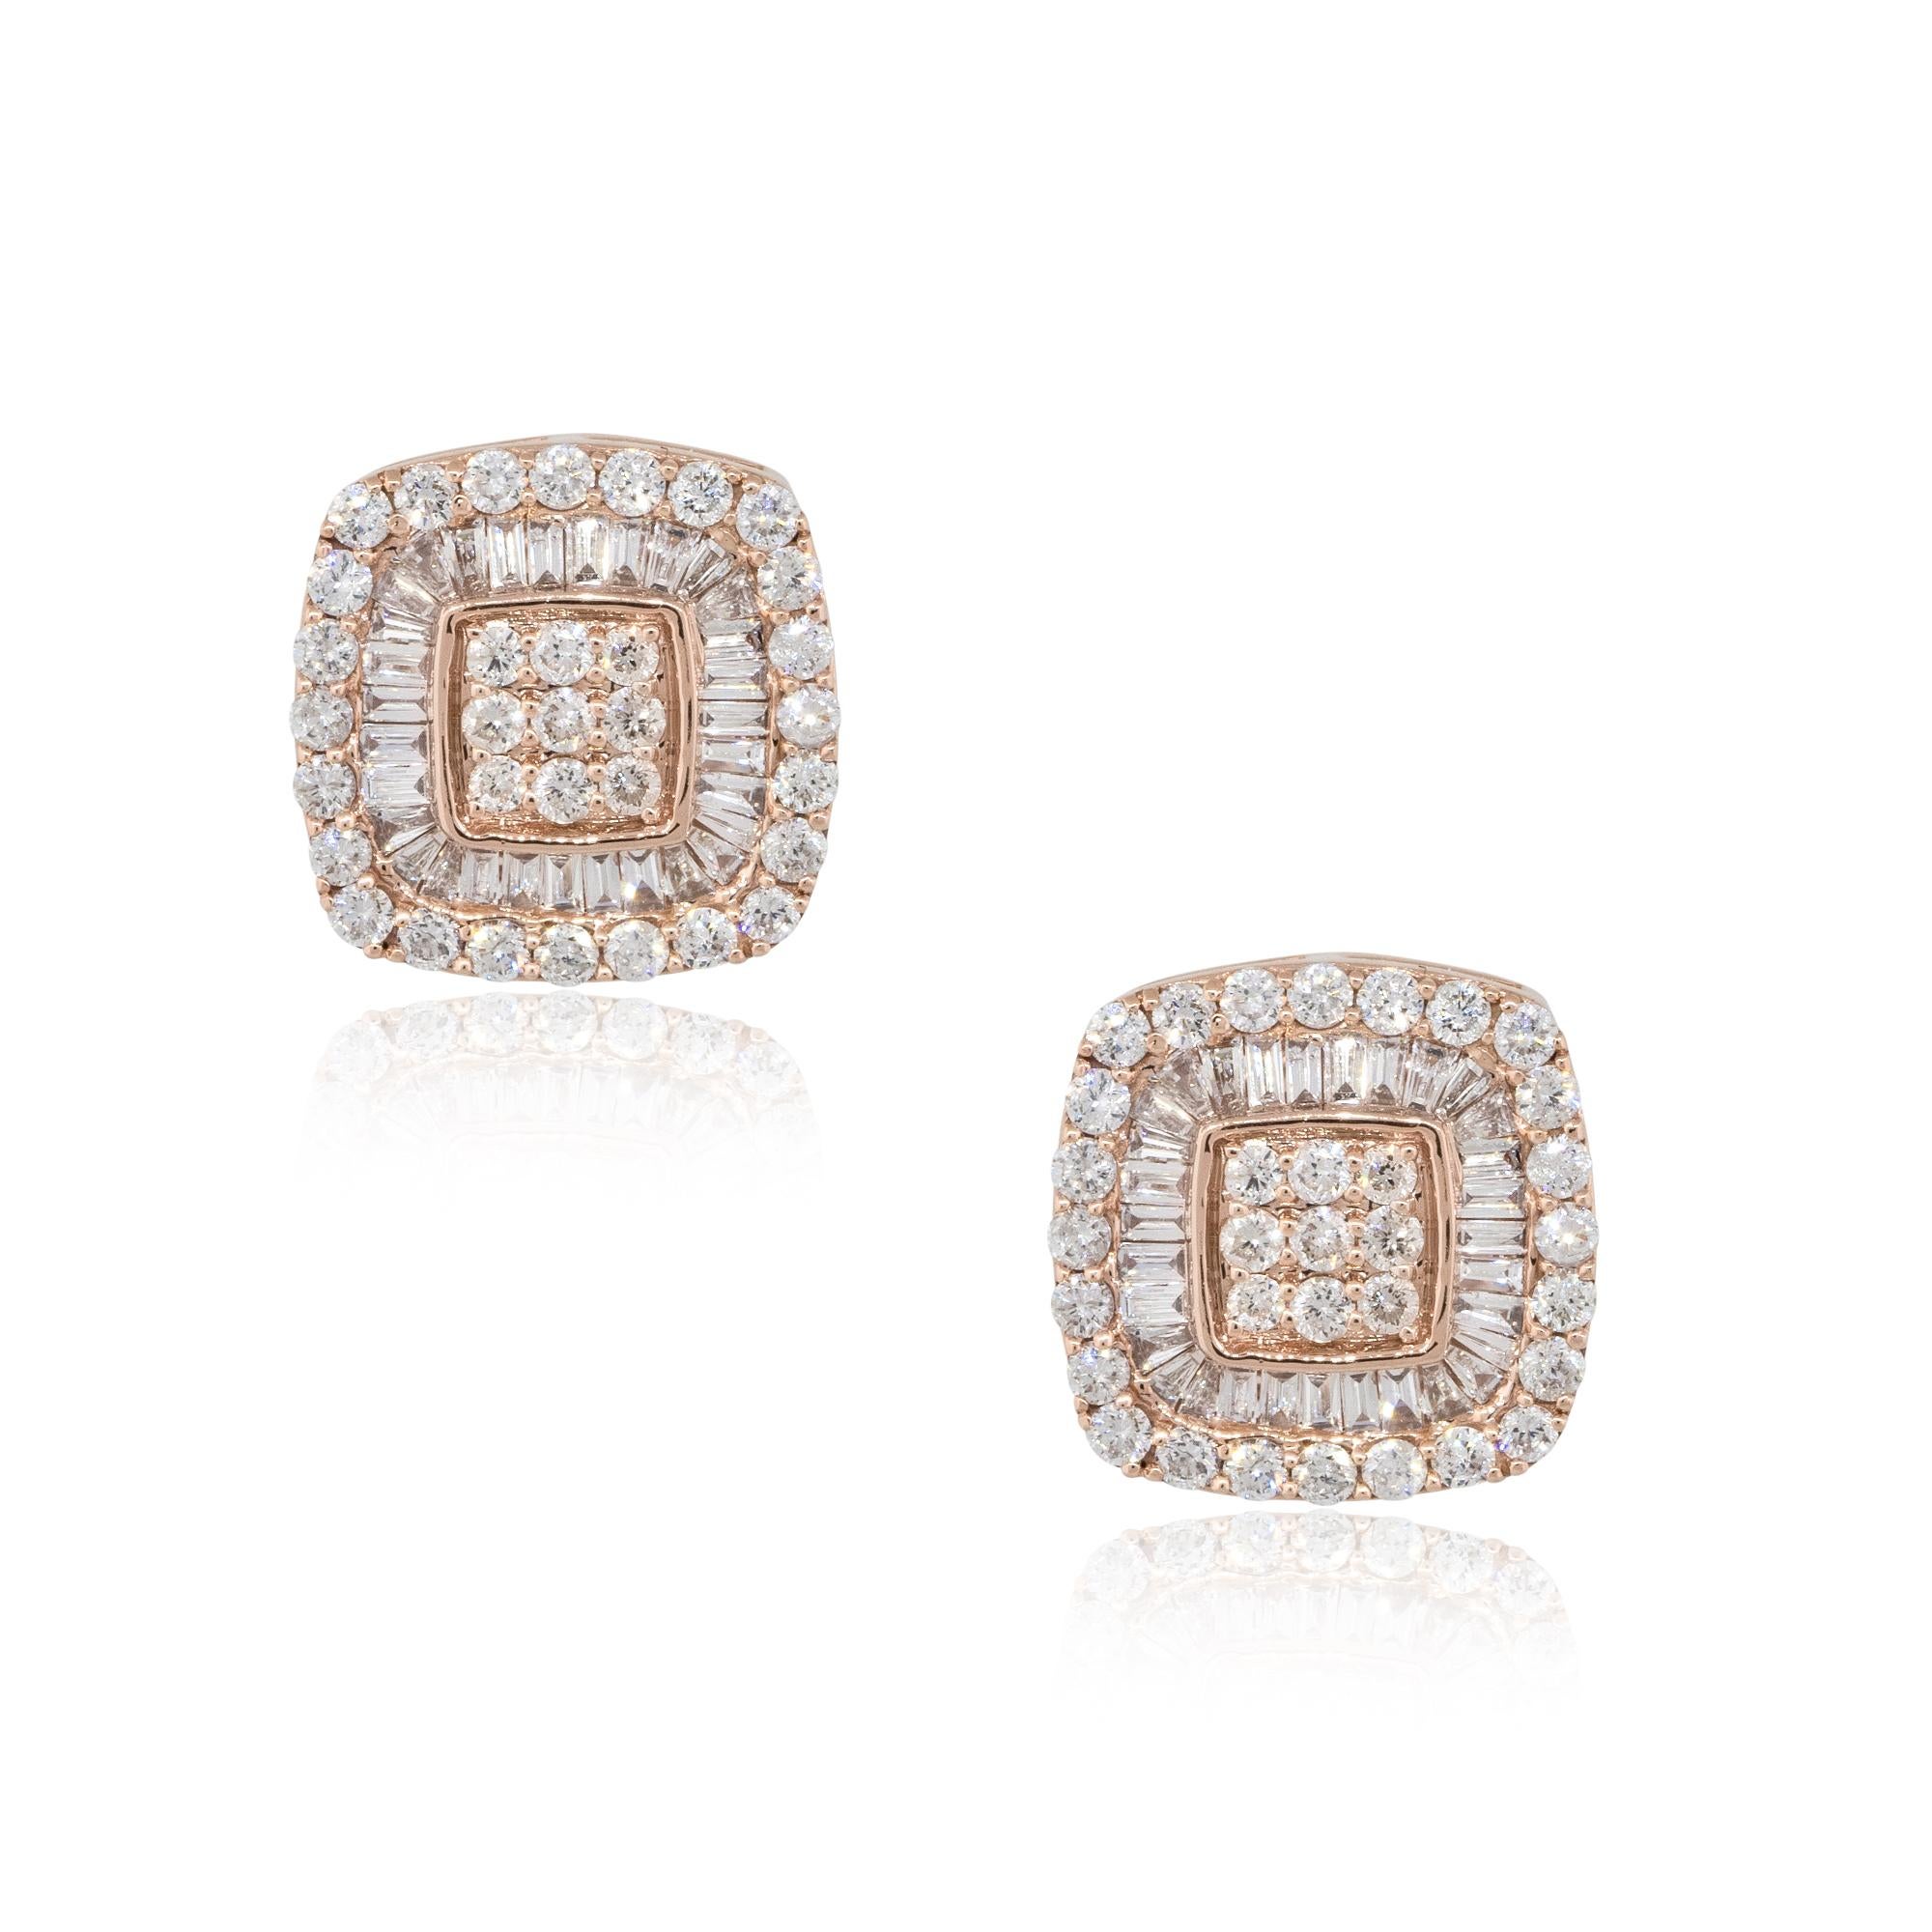 Material: 14k Rose Gold
Diamond Details: Approx. 1.06ctw of round and invisible set baguette Diamonds. Diamonds are G/H in color and VS in clarity.
Measurements: 11.5mm x 15.5mm x 11.5mm
Earrings Backs: Tension posts
Total Weight: 4.6g